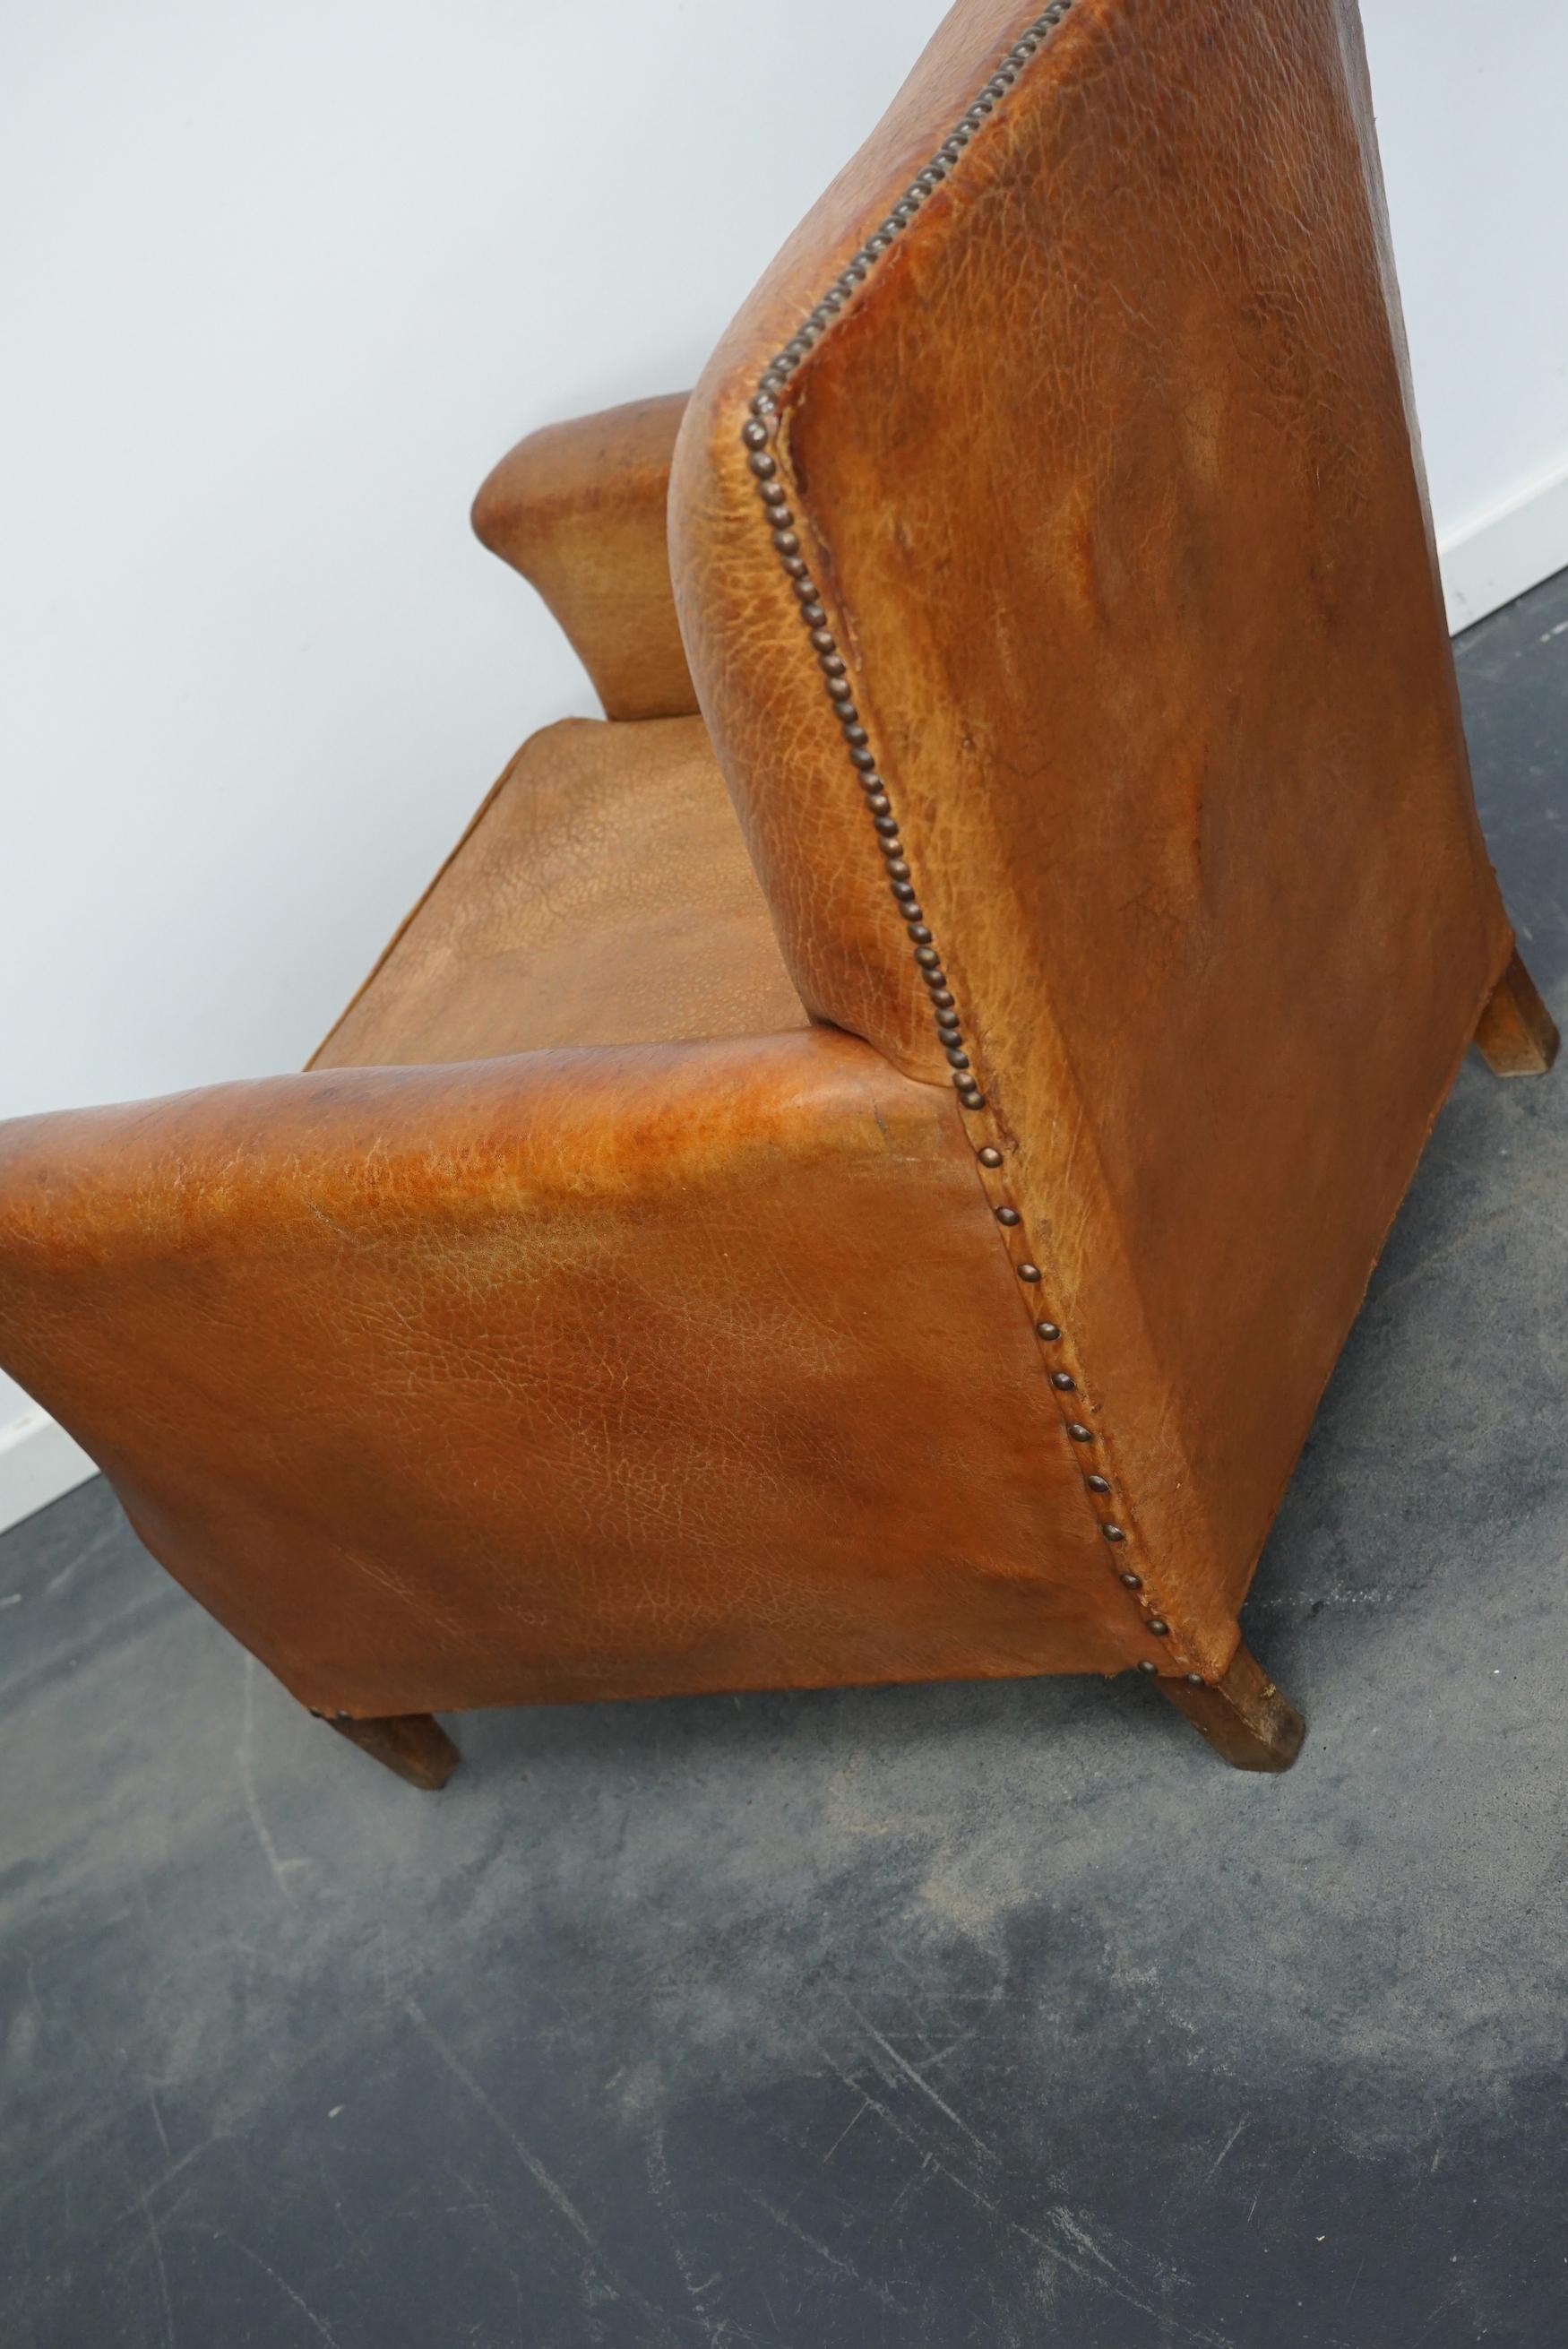 Vintage French Cognac-Colored Leather Club Chair, 1940s For Sale 7